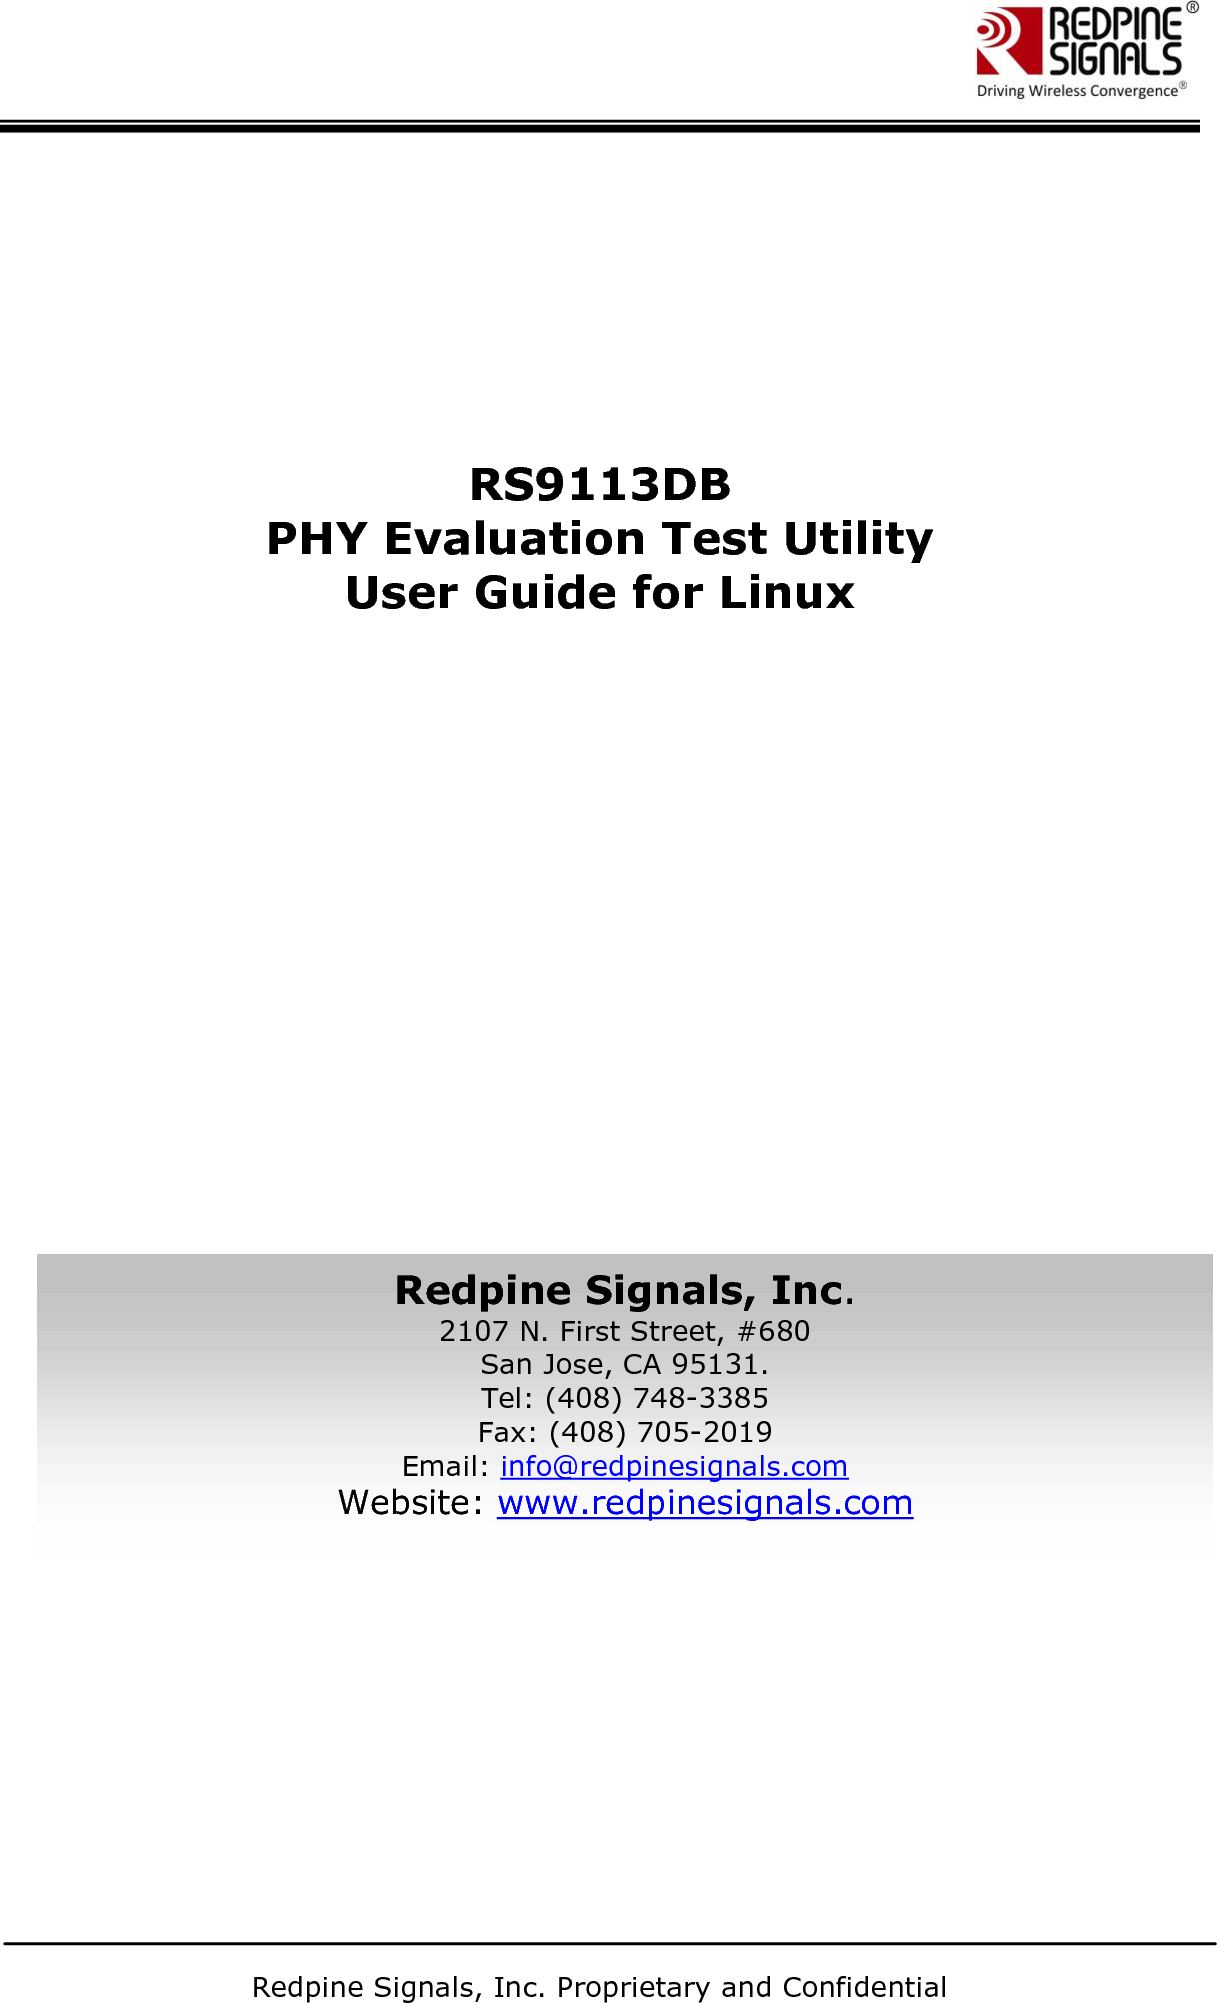       Redpine Signals, Inc. Proprietary and Confidential           RS9113DB PHY Evaluation Test Utility  User Guide for Linux         Redpine Signals, Inc. 2107 N. First Street, #680 San Jose, CA 95131. Tel: (408) 748-3385 Fax: (408) 705-2019  Email: info@redpinesignals.com  Website: www.redpinesignals.com  